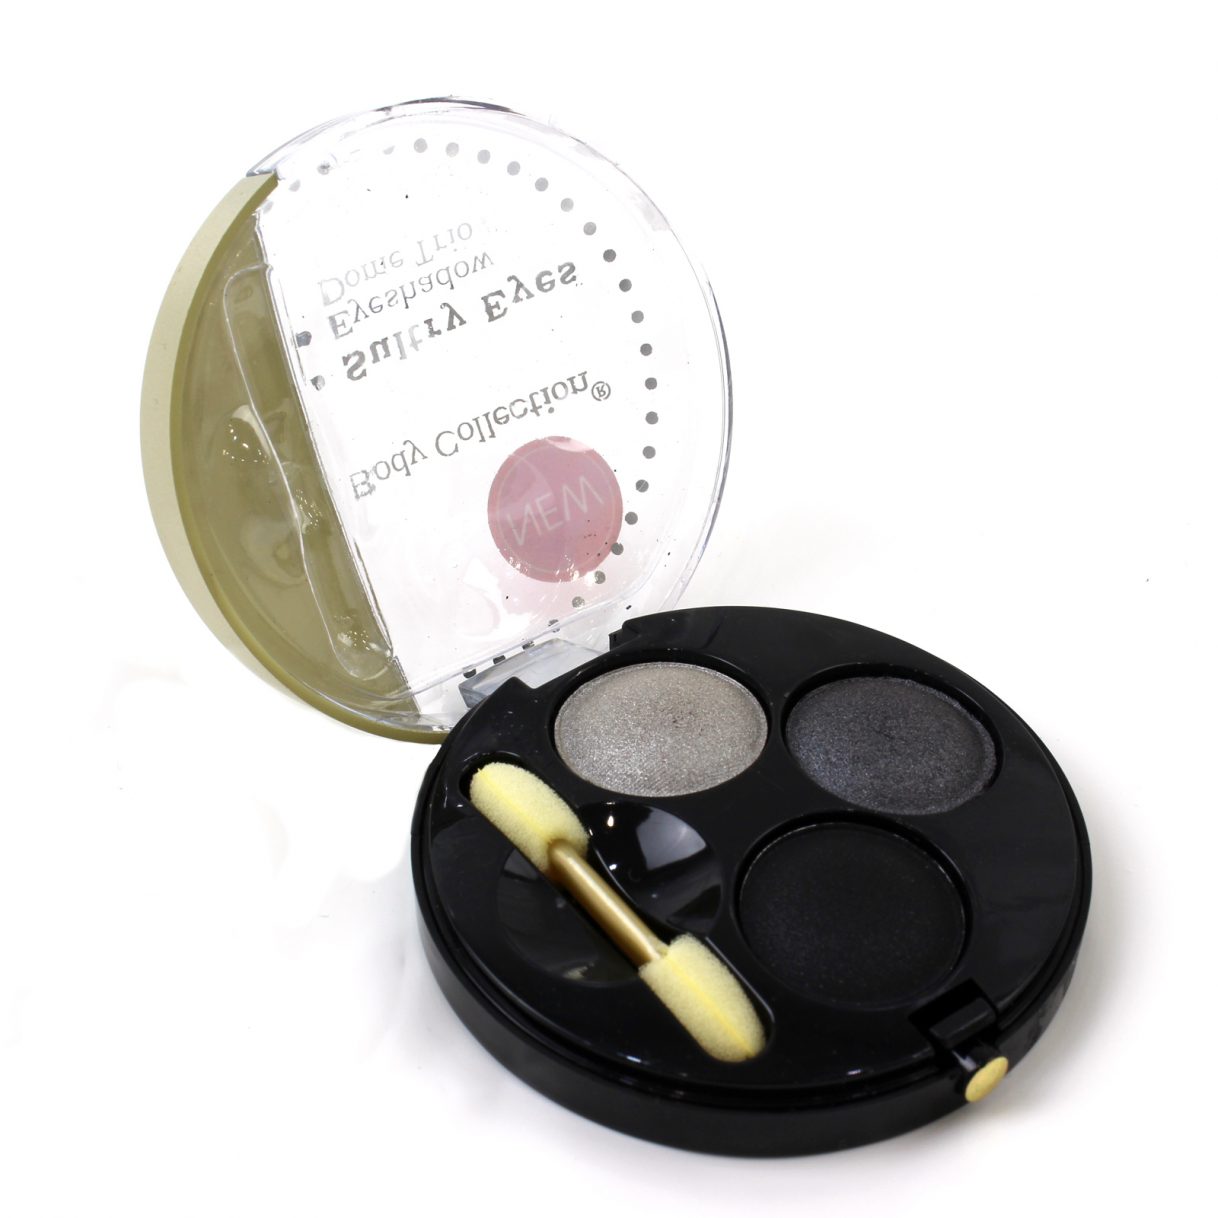 Charcoal Eye Makeup Eye Shadow Dome Trio Sultry Eyes Charcoal Body Collection Applicator